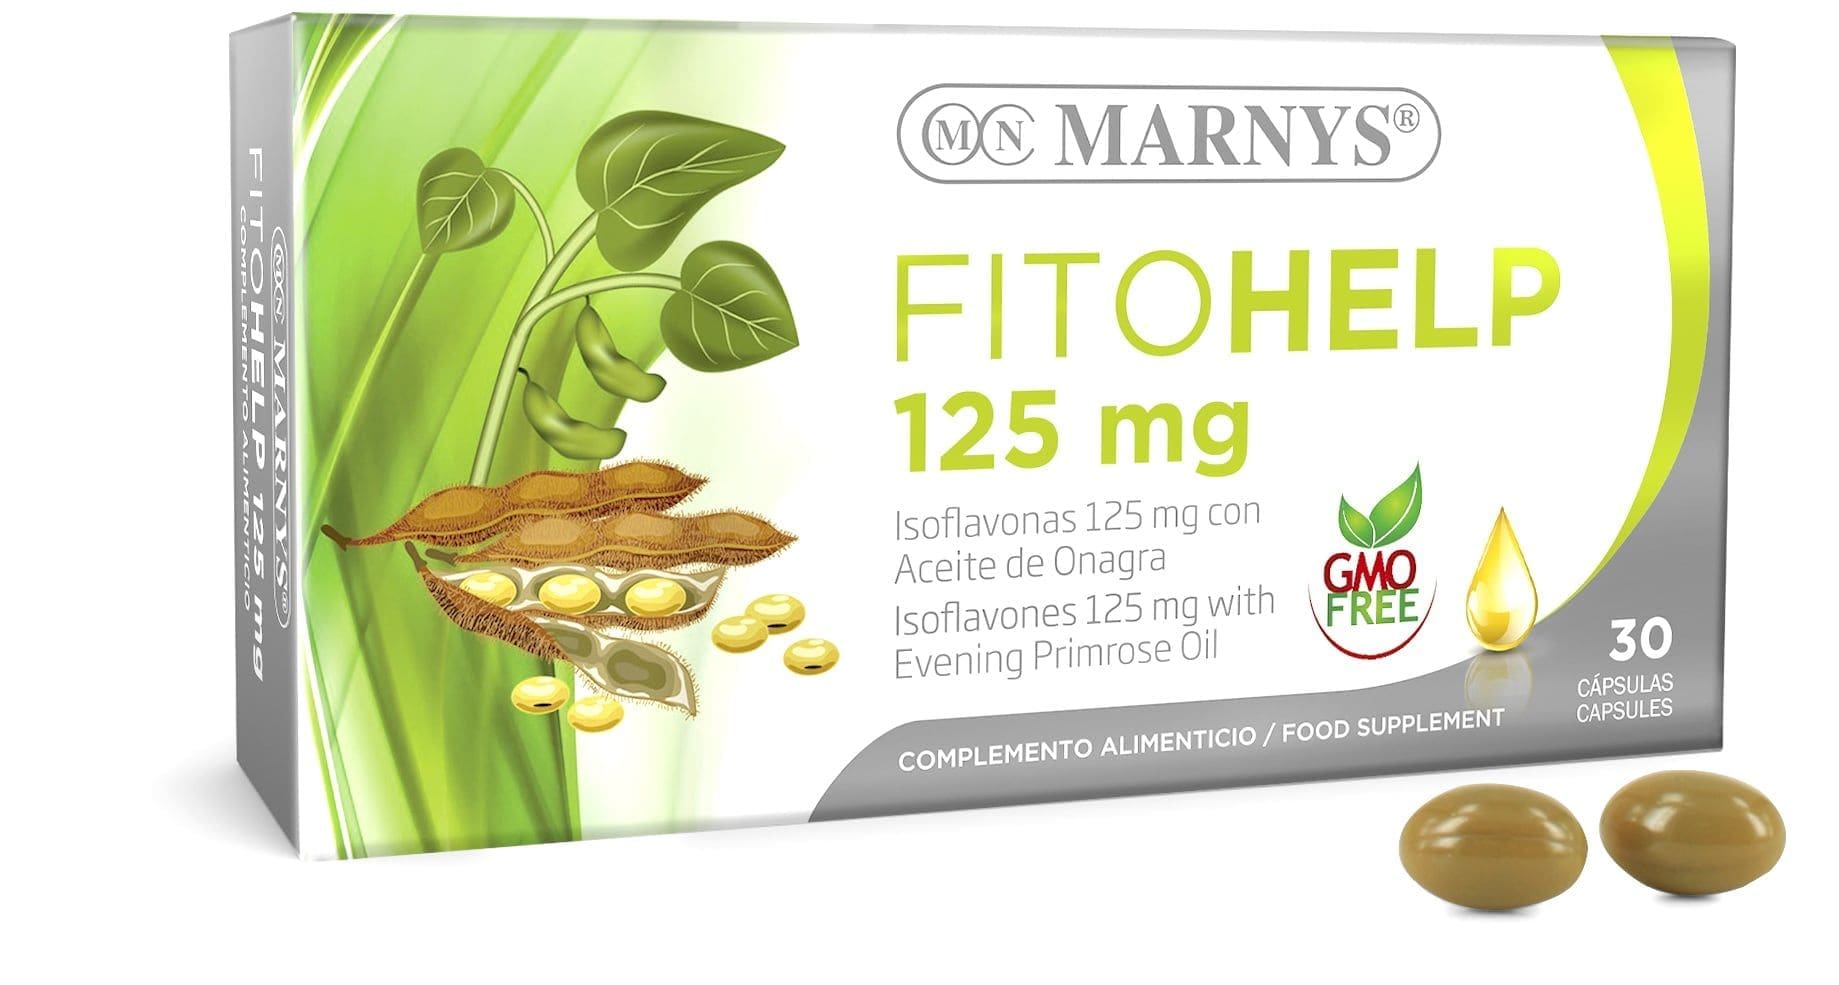 Marnys Fitohelp Capsules 30S